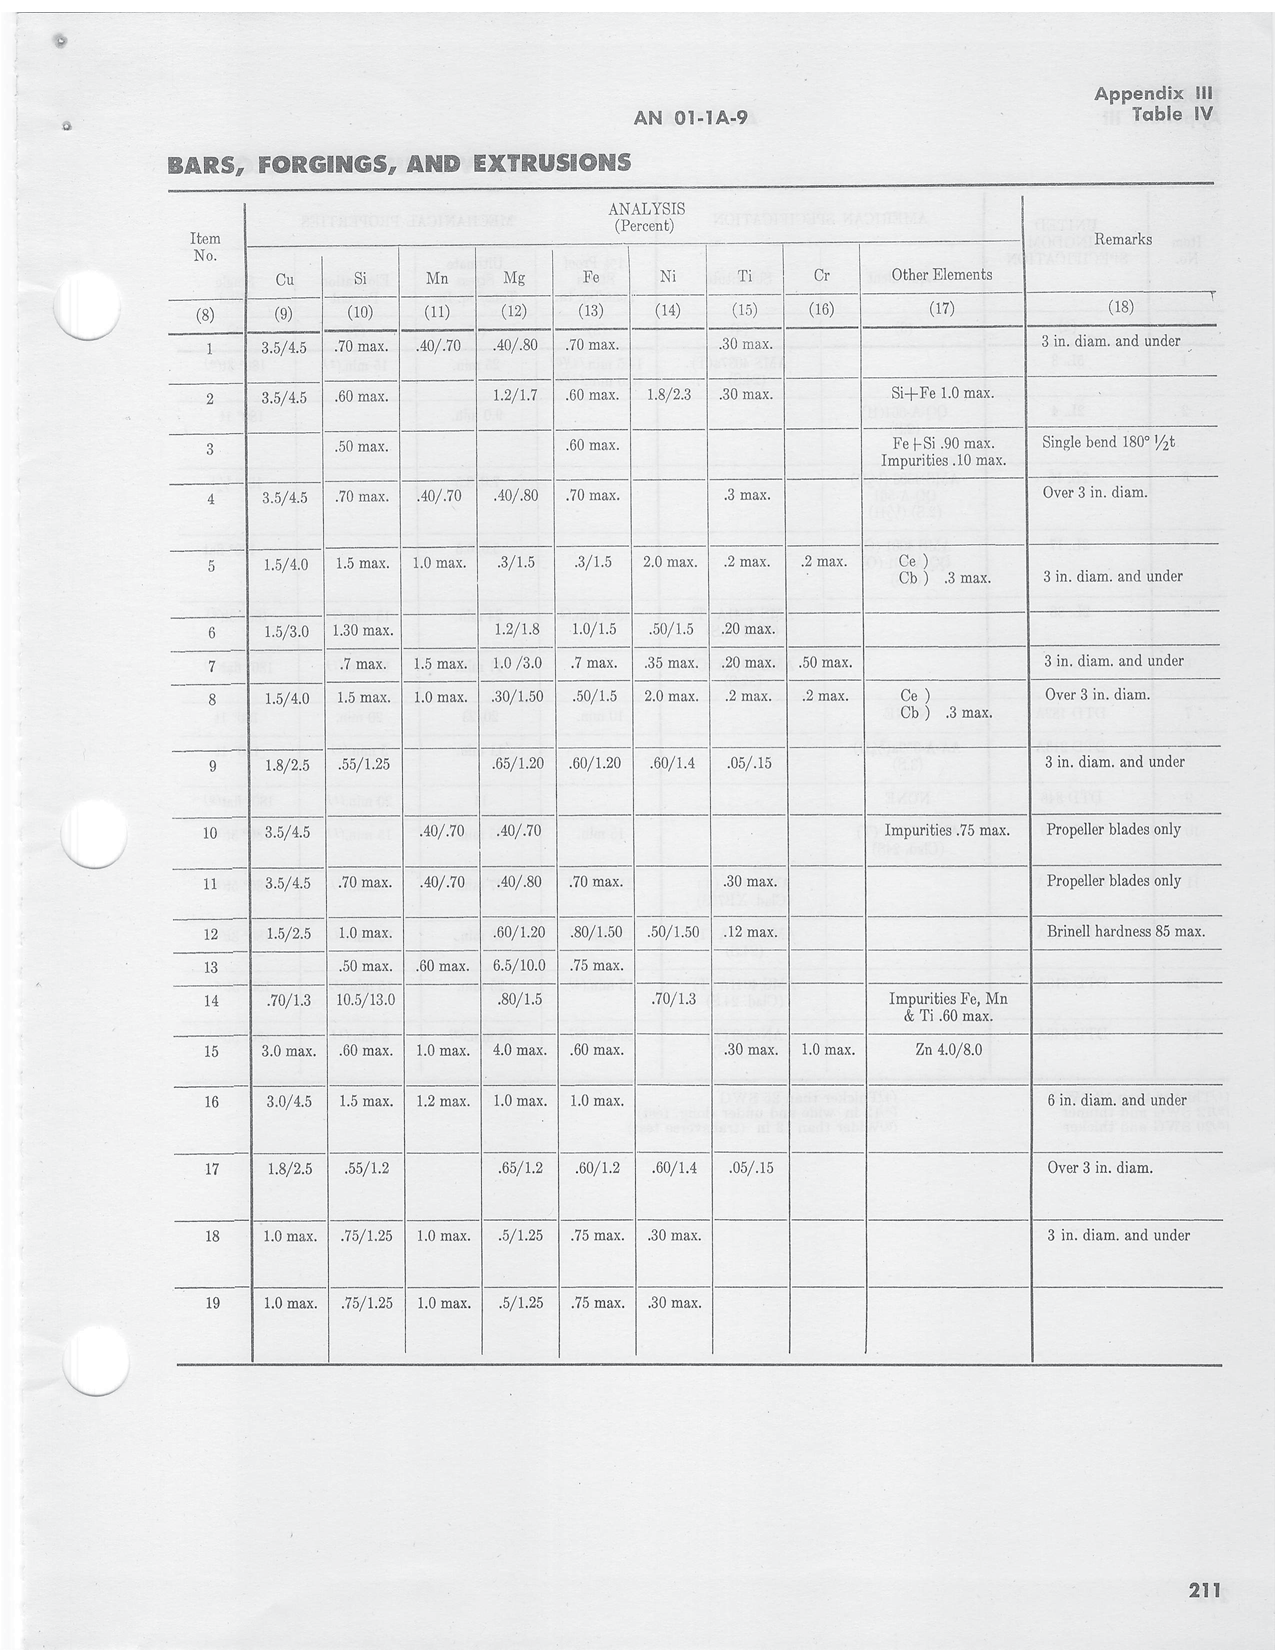 Sample page 213 from AirCorps Library document: General Manual for Aircraft Metals